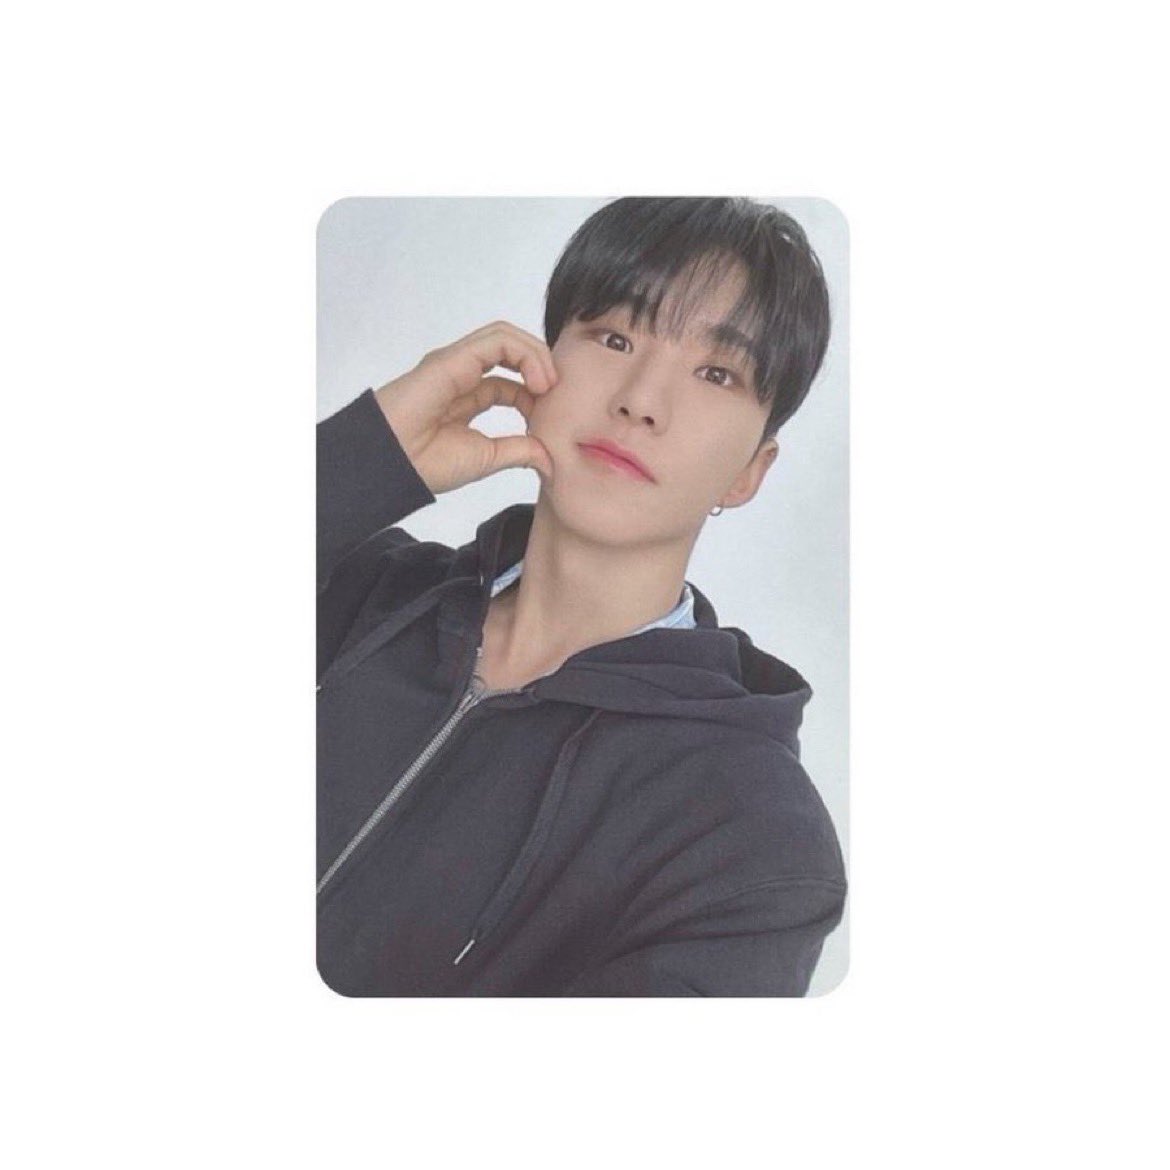 wts lfb ph svt

hoshi 8th anniversary pc

— 600 + lsf
— mop: gcash / maya, mod: sco

t. 🏷️ svt hoshi 8th anniversary connect pc

dm/reply to claim!